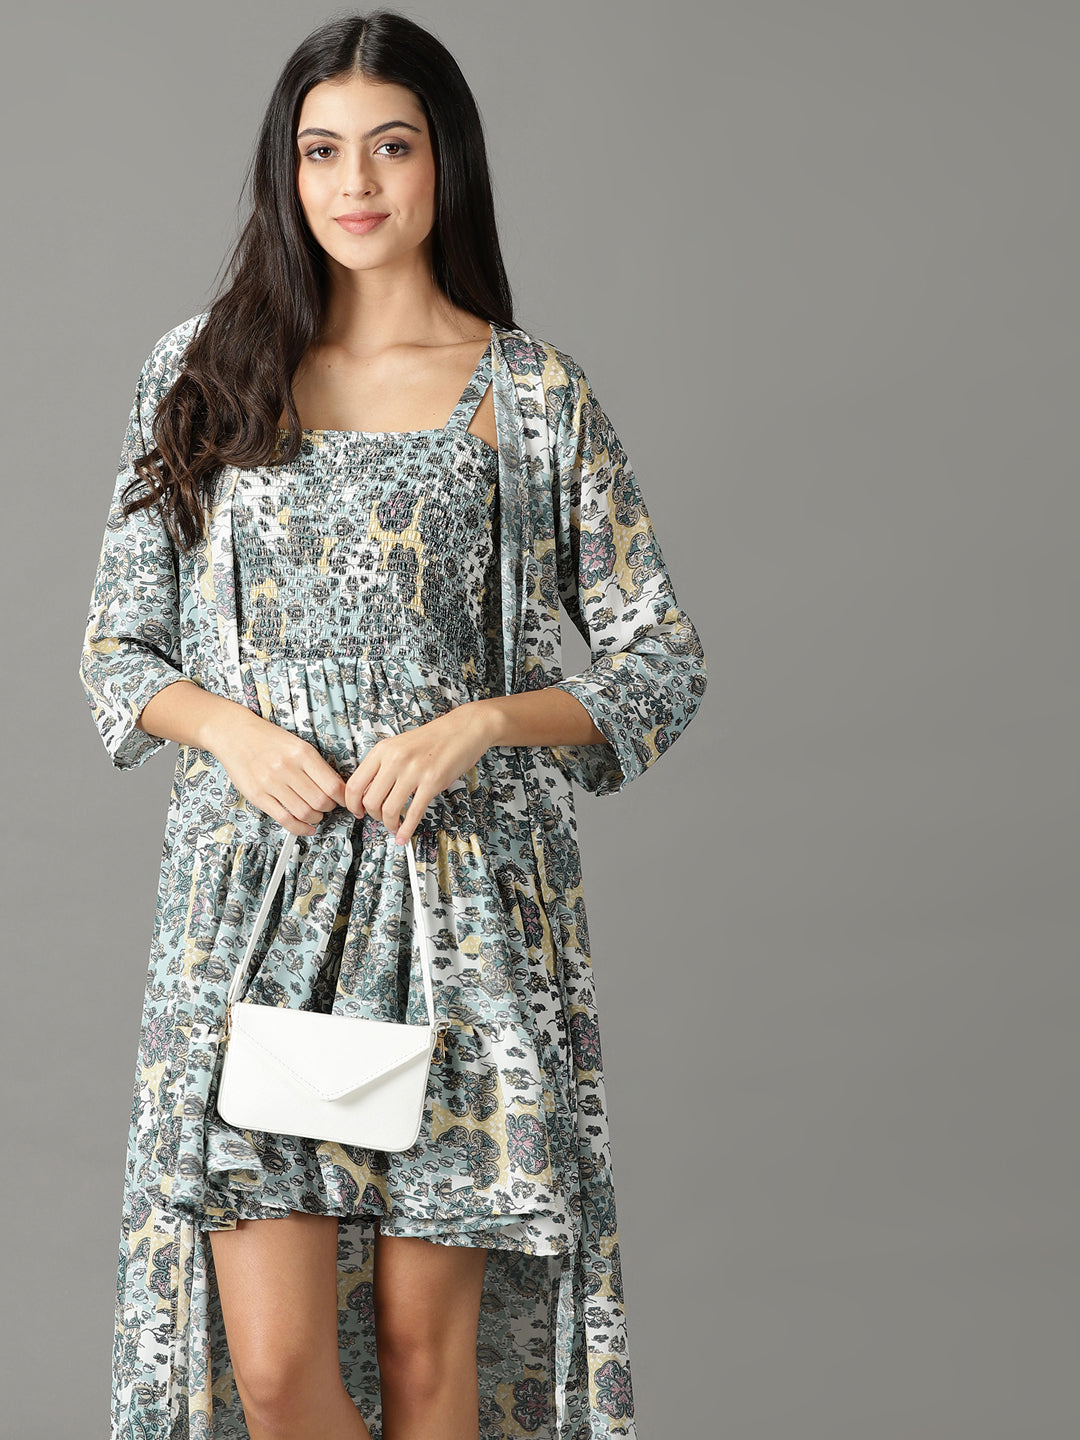 Women's Sea Green Printed Fit and Flare Dress